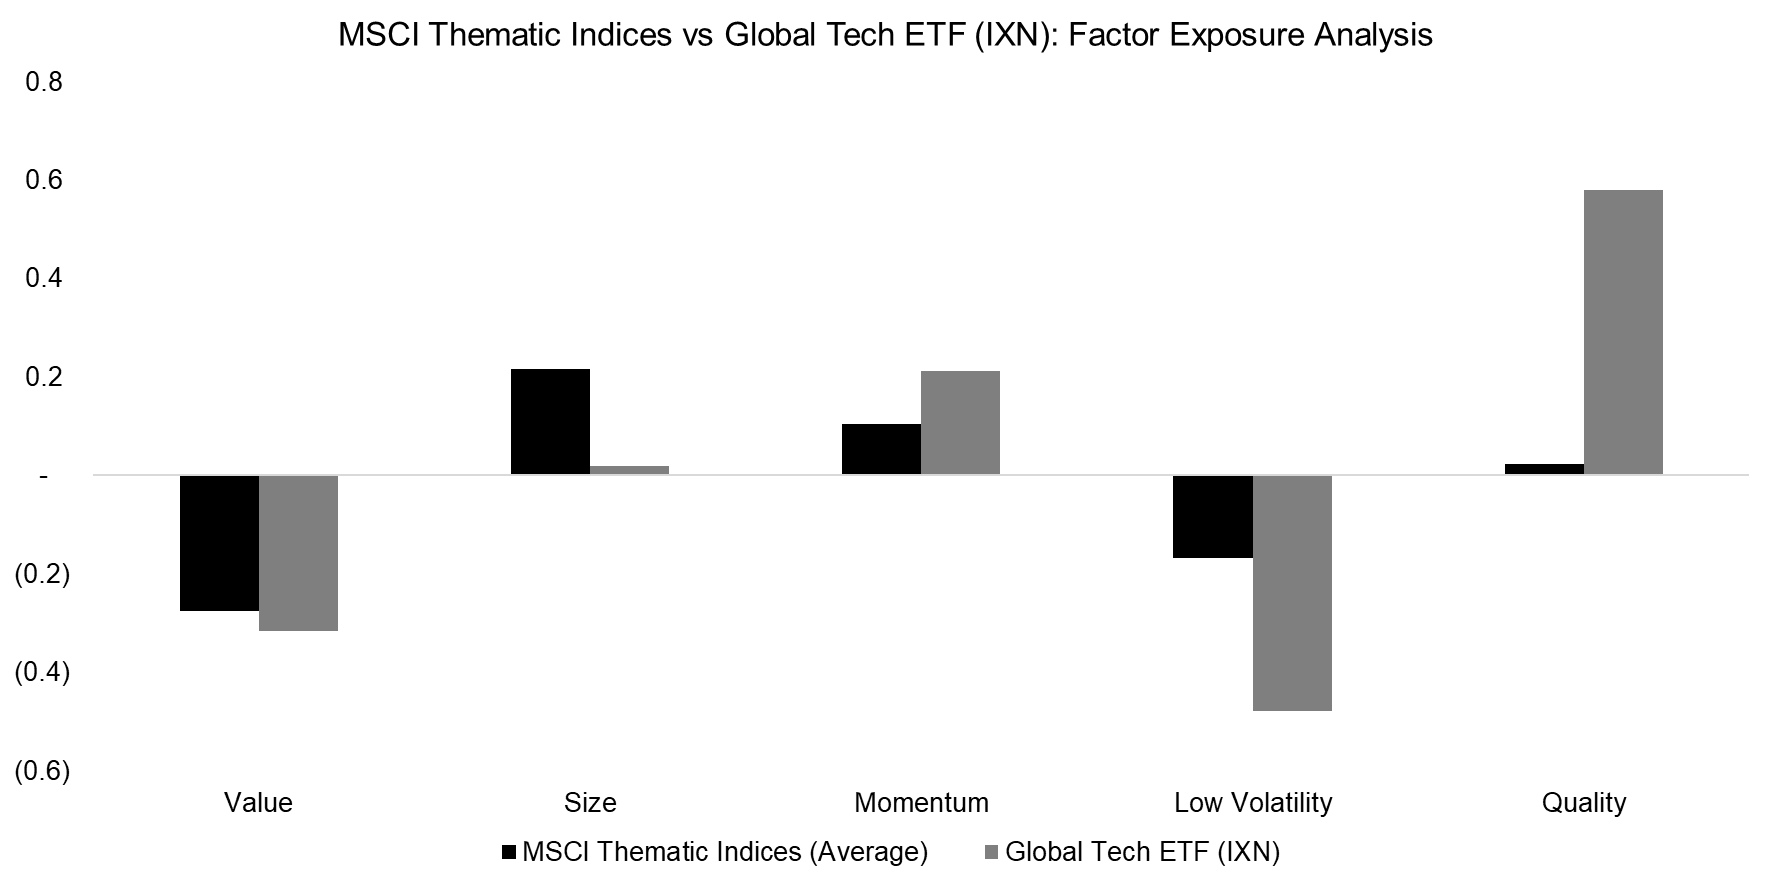 MSCI Thematic Indices vs Global Tech ETF (IXN) Factor Exposure Analysis